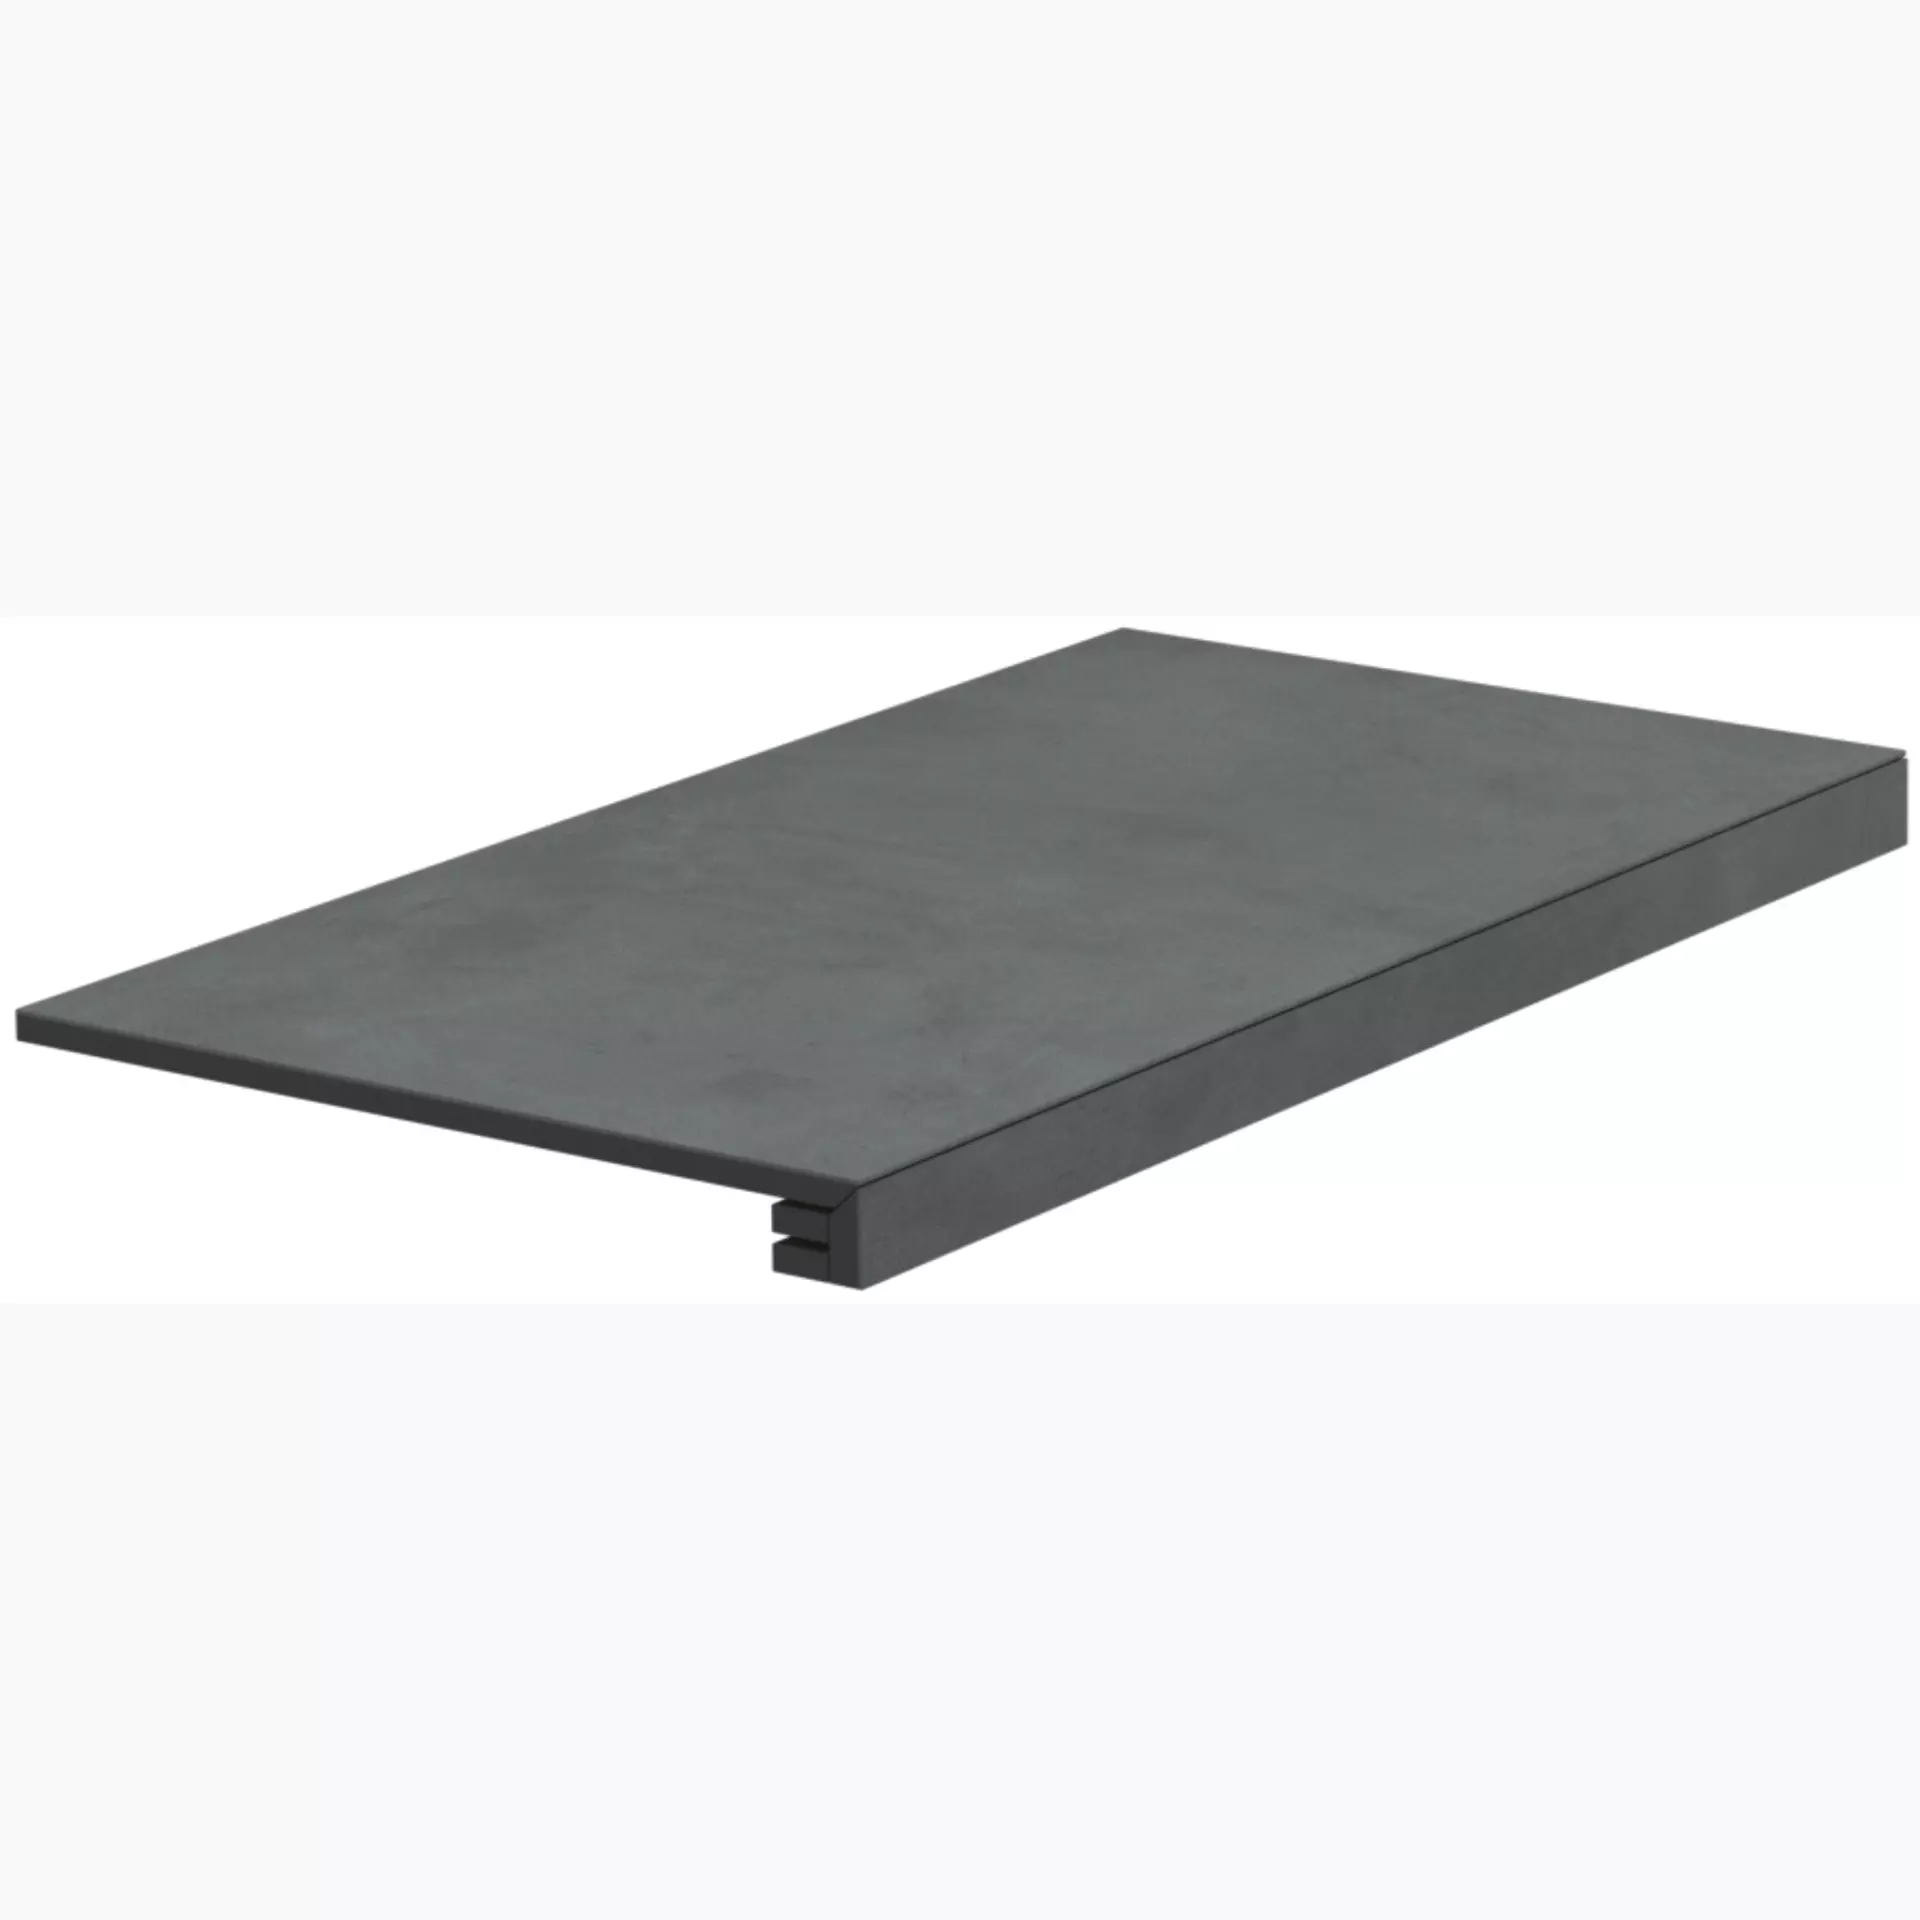 Del Conca Htl Timeline Nightfall Htl02 Naturale Step plate Lineare G3TL02RG 33x60cm rectified 8,5mm